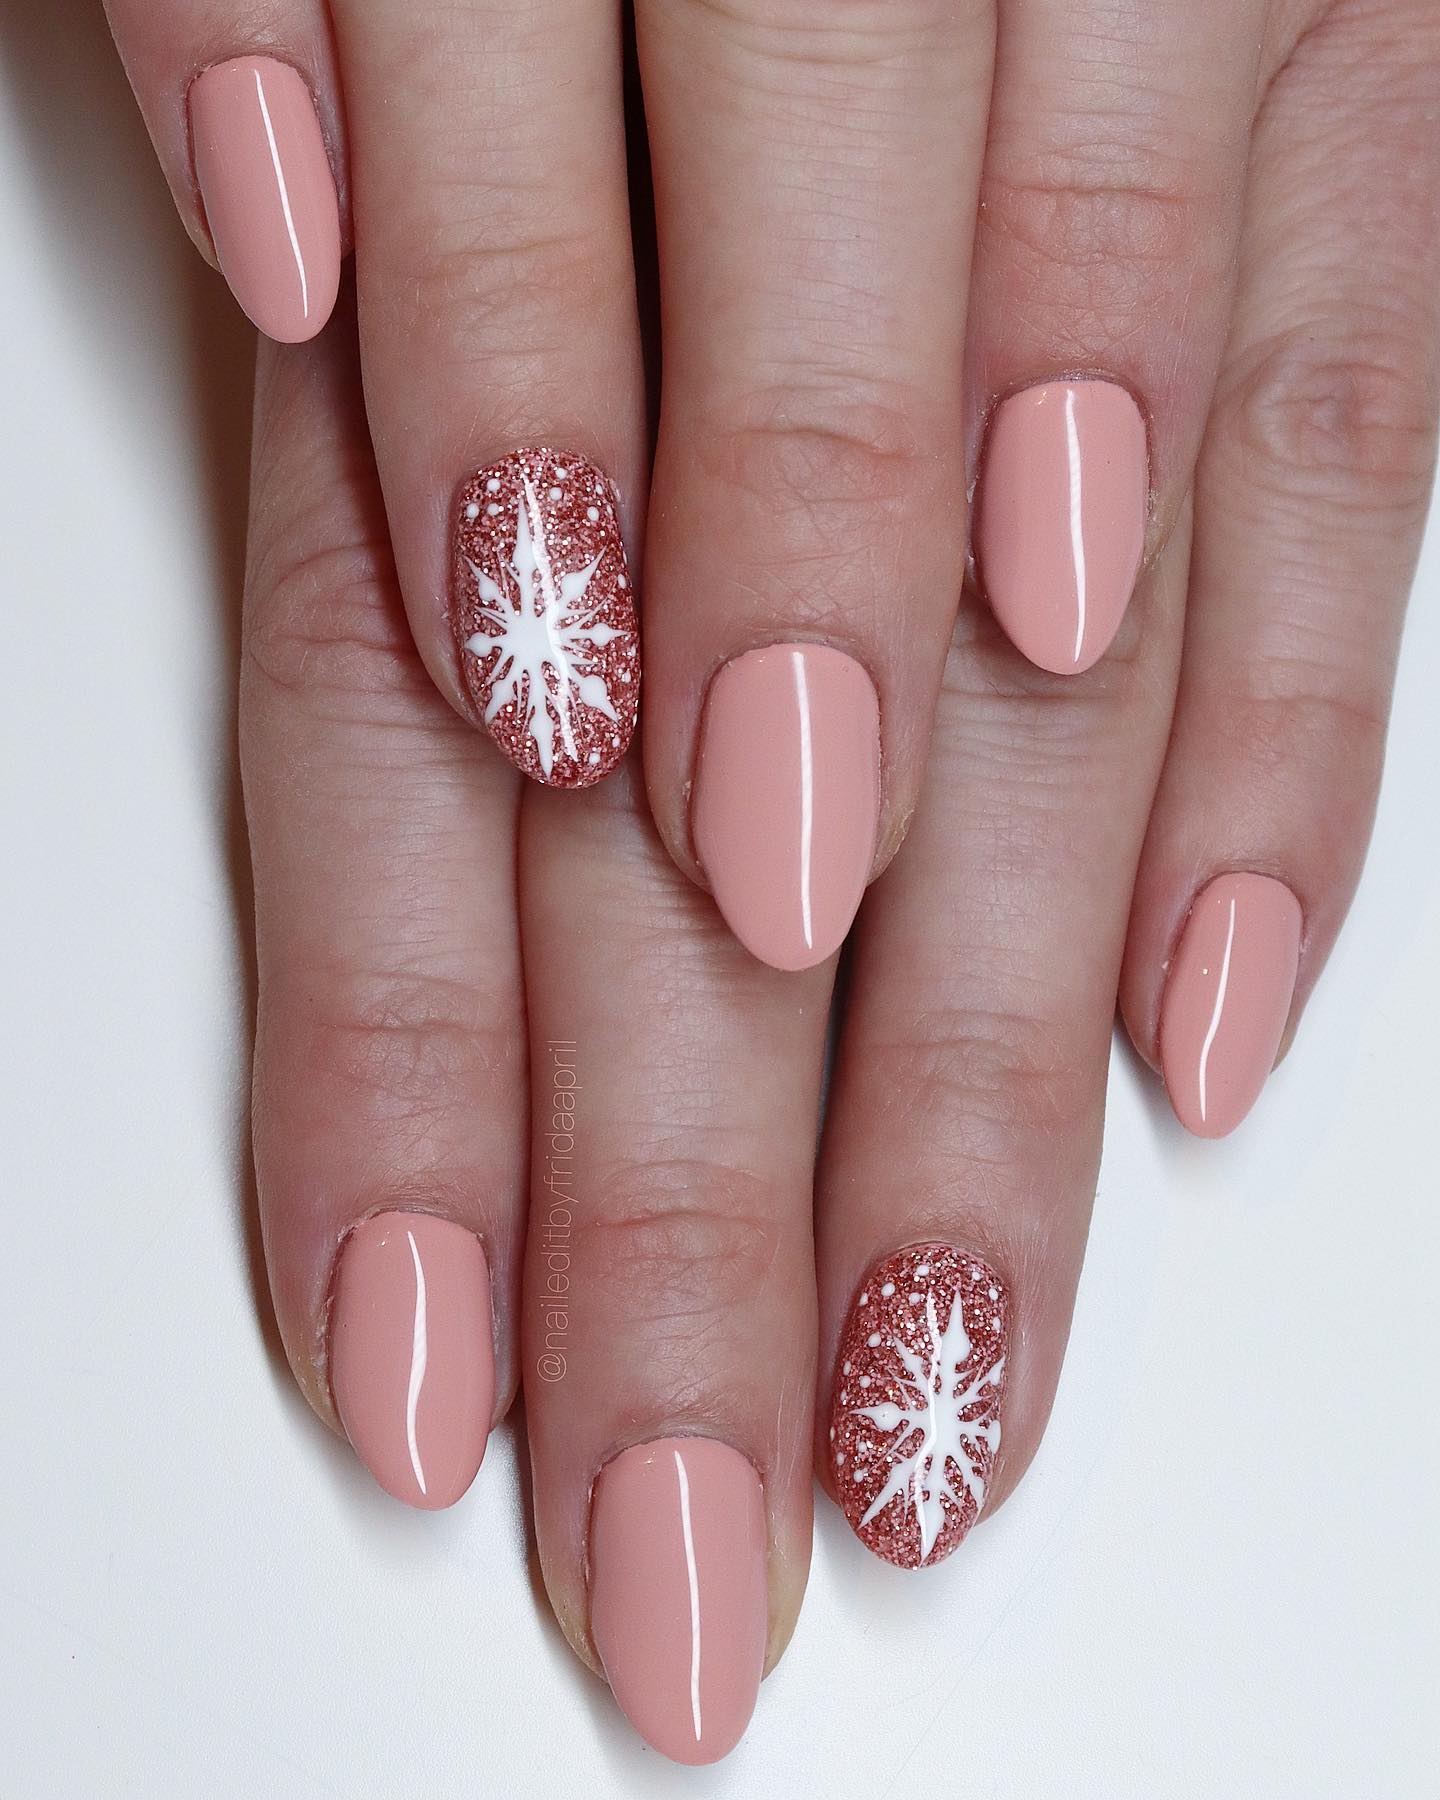 How to make nude almond nails have a winter look? As accent nails, a snowflake on glittered nails will look perfect.